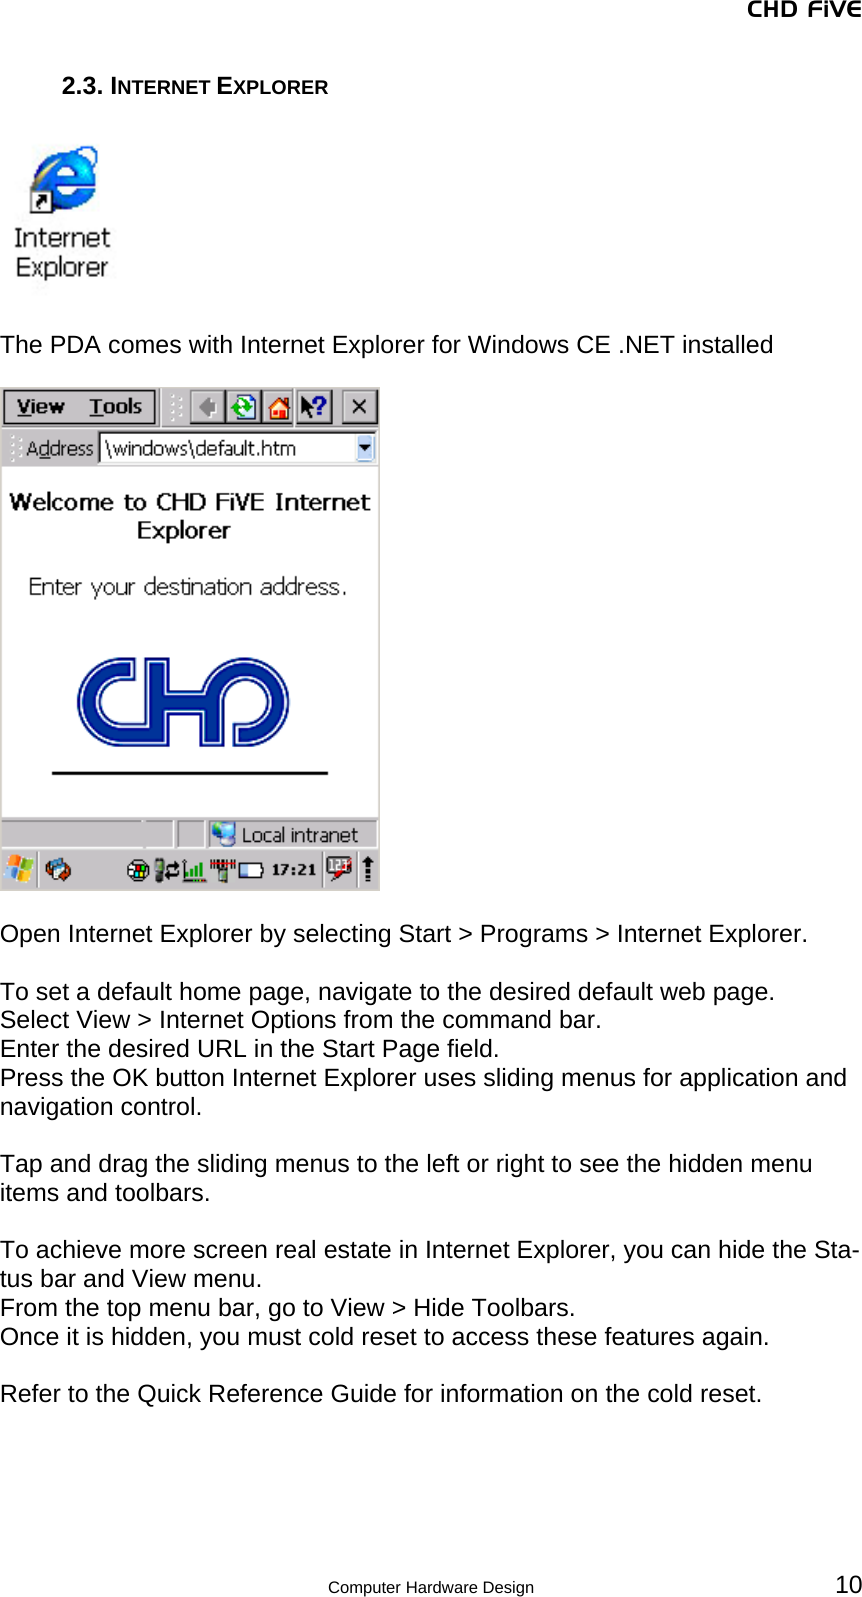 CHD FiVE 2.3. INTERNET EXPLORER    The PDA comes with Internet Explorer for Windows CE .NET installed    Open Internet Explorer by selecting Start &gt; Programs &gt; Internet Explorer.  To set a default home page, navigate to the desired default web page. Select View &gt; Internet Options from the command bar.  Enter the desired URL in the Start Page field.  Press the OK button Internet Explorer uses sliding menus for application and navigation control.   Tap and drag the sliding menus to the left or right to see the hidden menu items and toolbars.  To achieve more screen real estate in Internet Explorer, you can hide the Sta-tus bar and View menu.  From the top menu bar, go to View &gt; Hide Toolbars. Once it is hidden, you must cold reset to access these features again.   Refer to the Quick Reference Guide for information on the cold reset.  Computer Hardware Design 10 